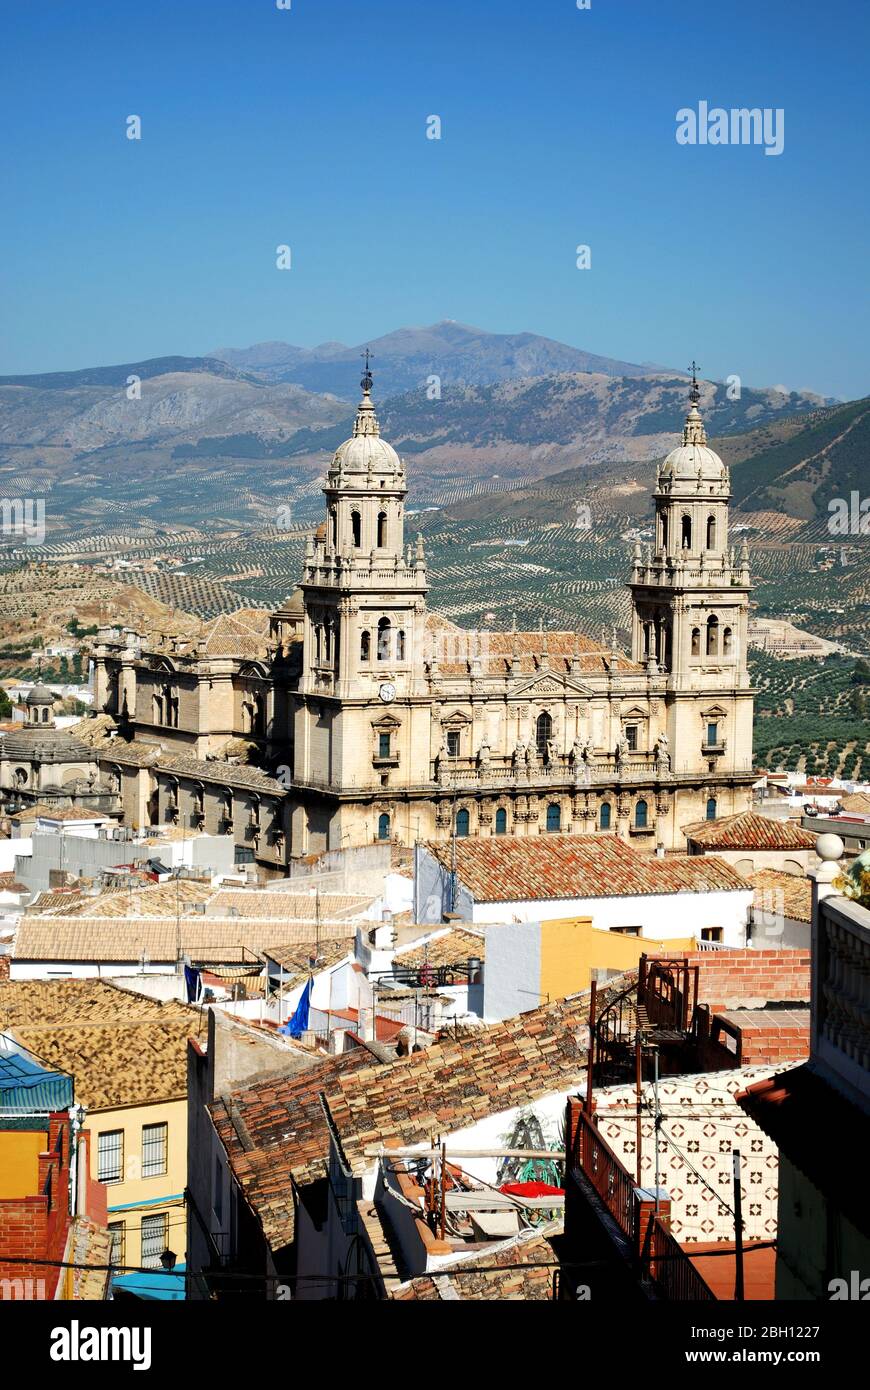 Elevated view of the Cathedral with olive groves to the rear, Jaen, Jaen Province, Andalucia, Spain, Western Europe. Stock Photo